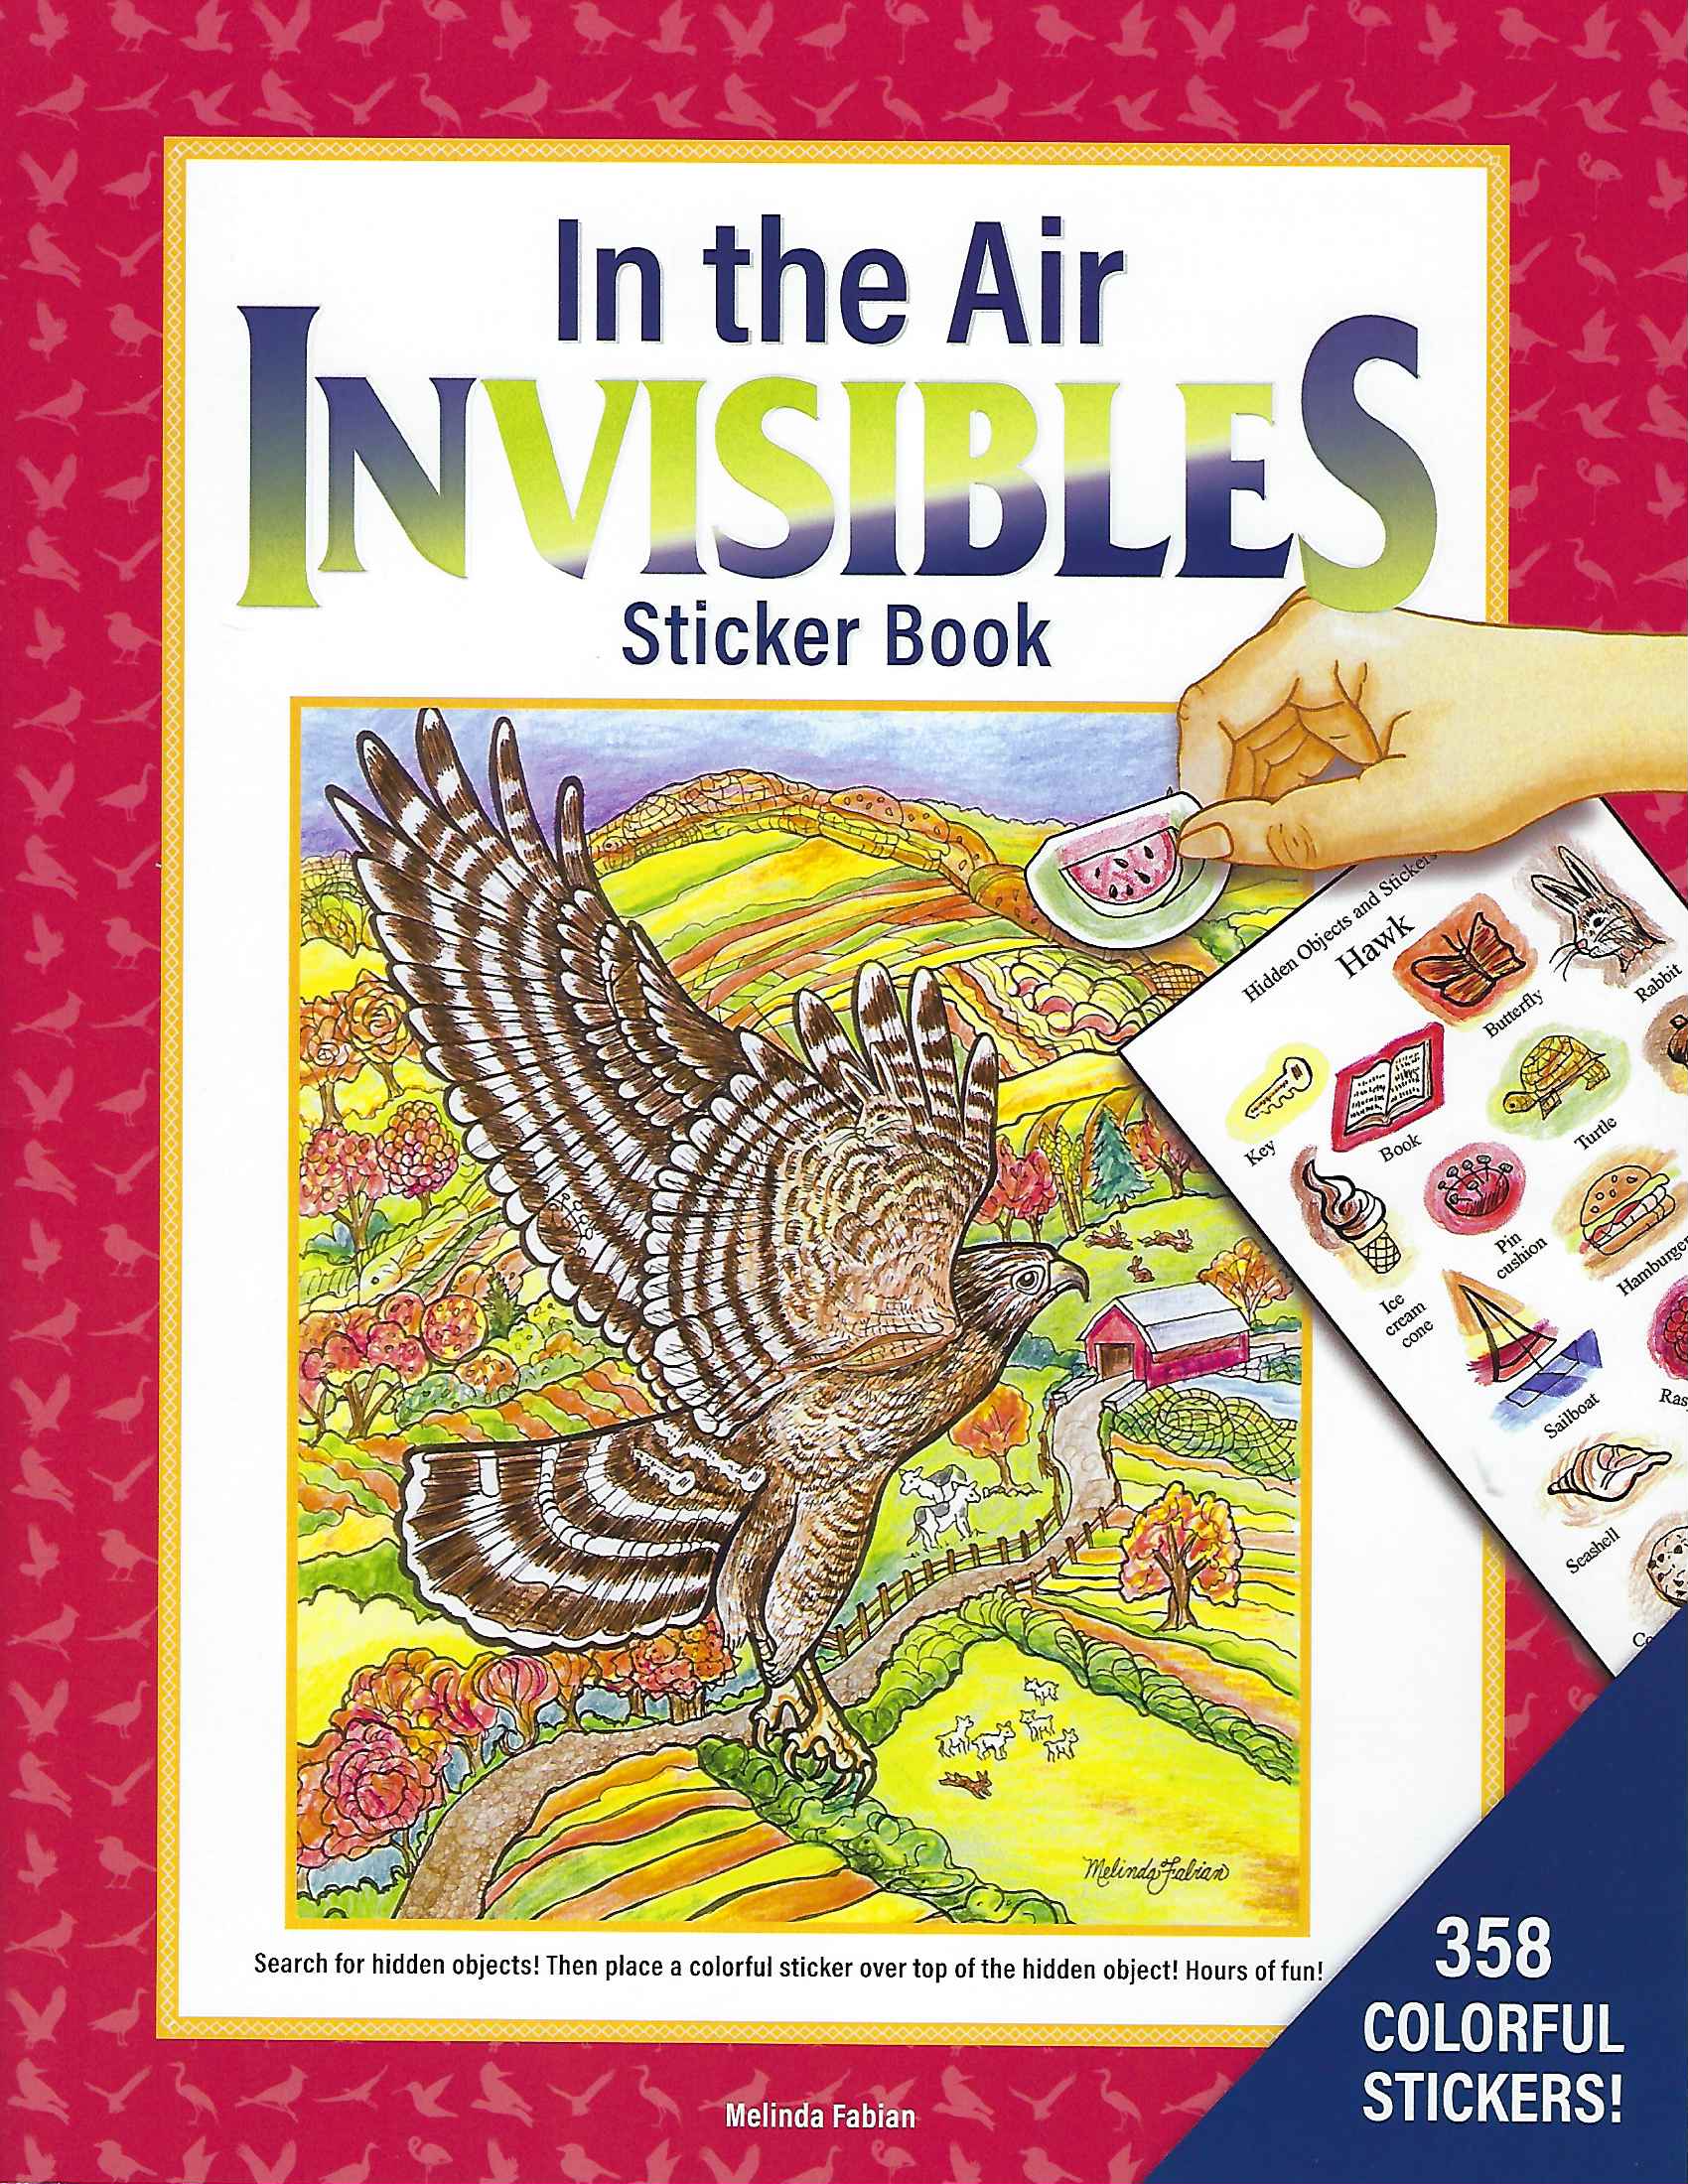 In the Air Invisibles Sticker Book Melinda Fabian